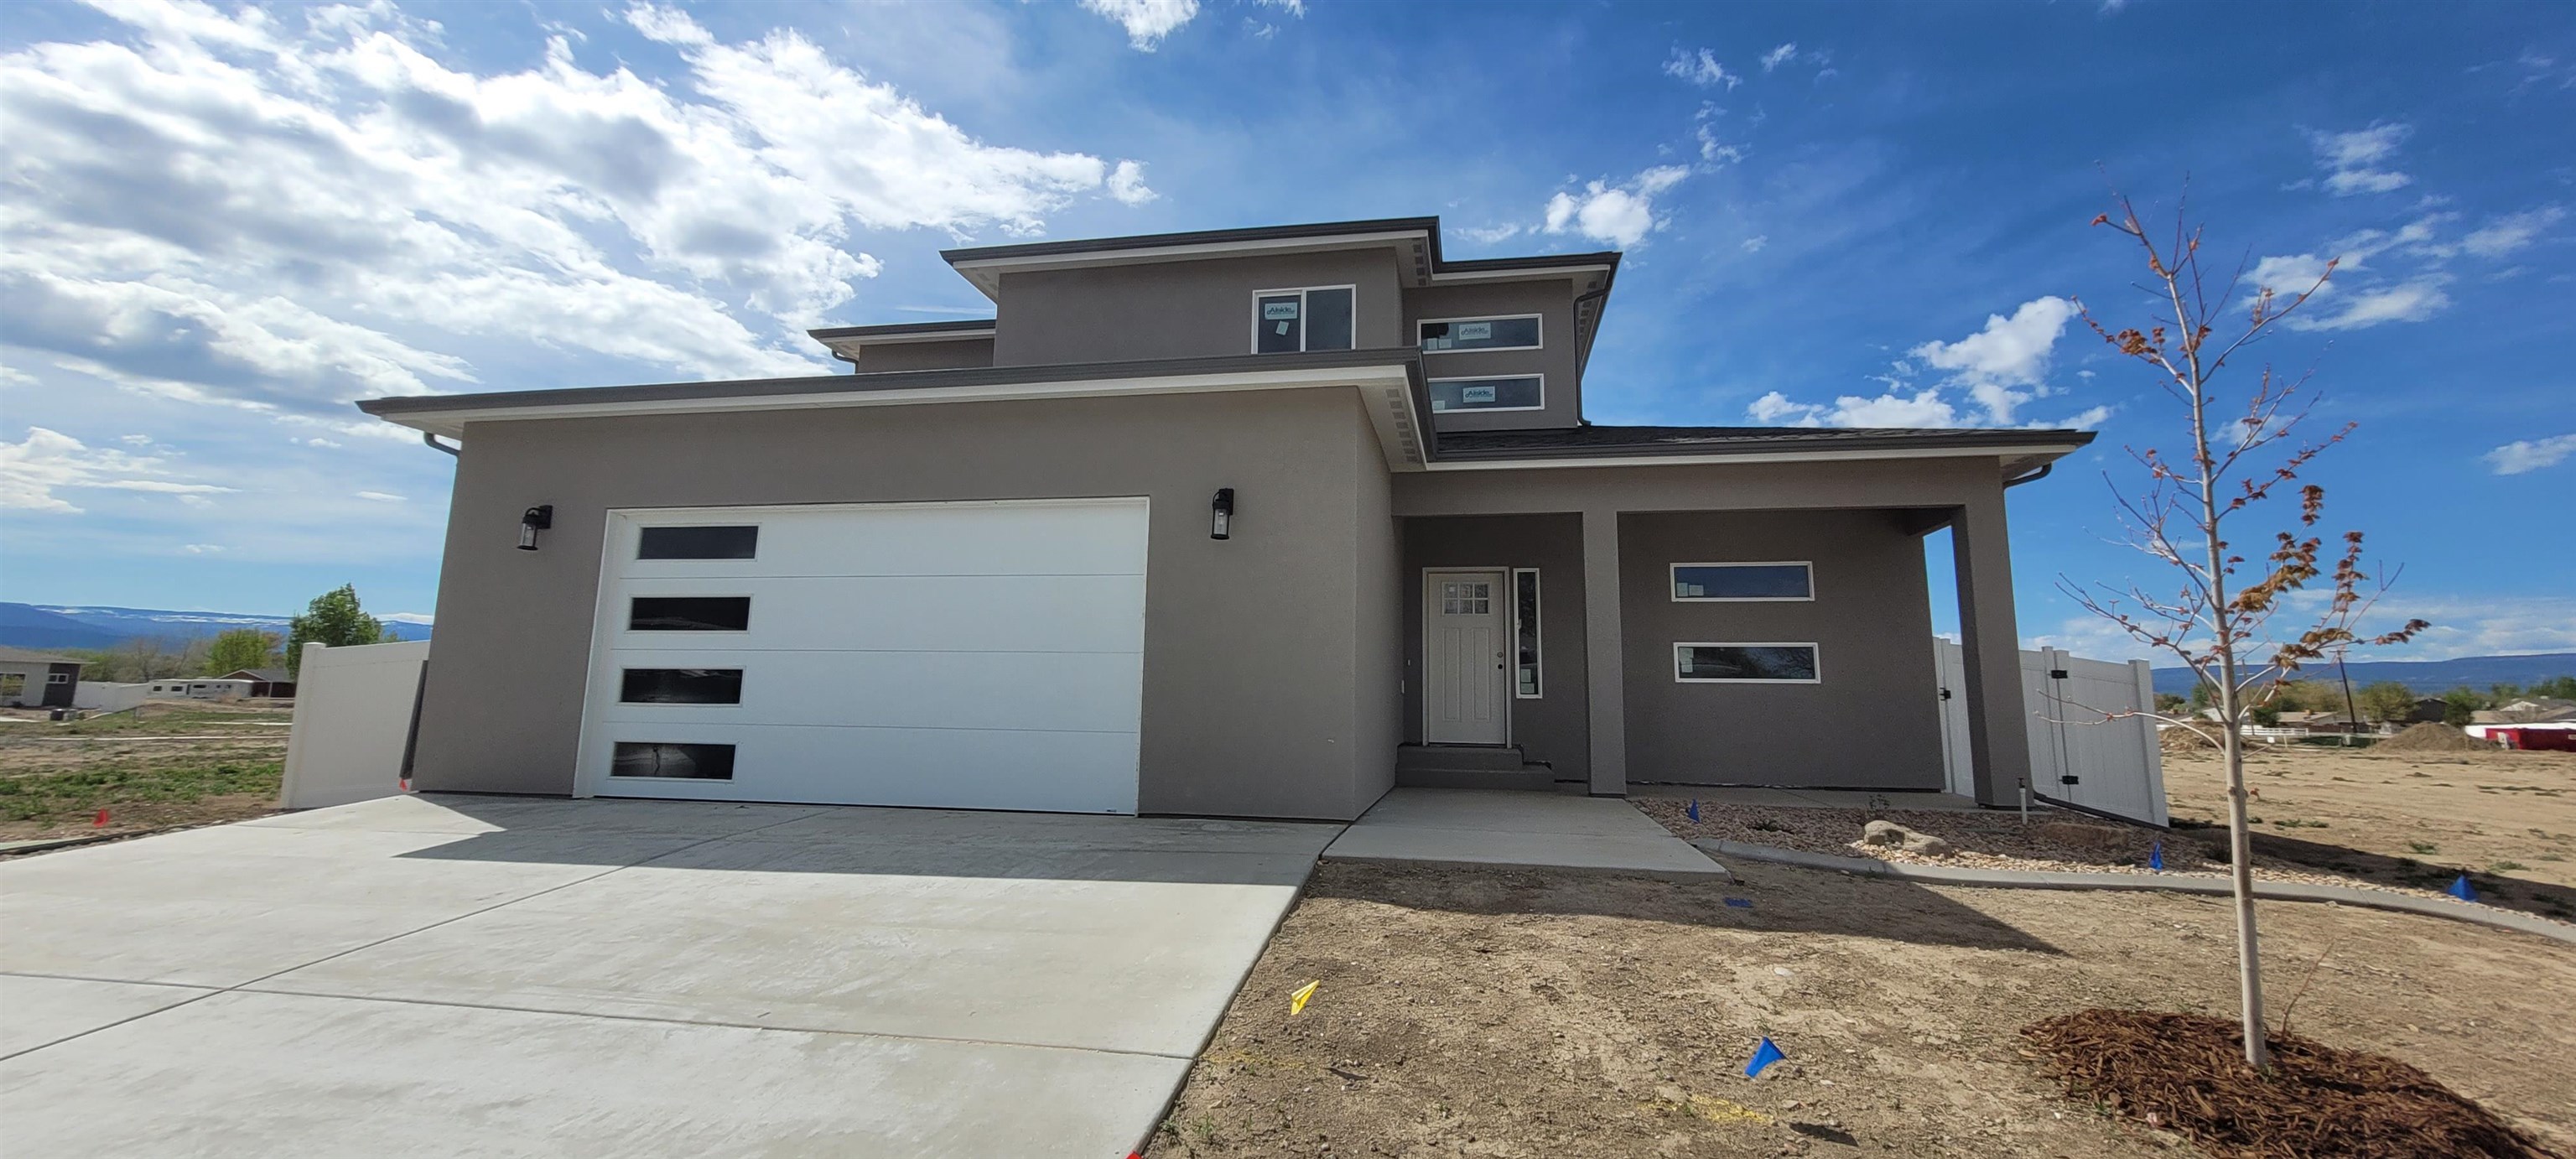 Use Builders' preferred lender and get 1% in closing costs OR CRA FINANCING TO POTENTIALLY SAVE HUNDRDS OF $$/ MO ON PAYMENTS (CALL FOR DETAILS). PICK LOT & FLOORPLAN OR GO CUSTOM IN VISTA MESA!! AMAZING Grand Mesa views from this new neighborhood just south east of 33 & E Roads! 3/4 Mile to the Riverfront Trail & 1/2 mile to the new Mesa Co Community Campus with library, early childhood ed center & more . INCLUDES LANDSCAPING & FENCING. Two story, 4 Bedroom, 3 bath, 2230 Sqft.  primary on the main, plus office, 3 beds up, open nice great room area for friends and family gatherings, 2 car oversize garage and RV parking. Estimated completion​​‌​​​​‌​​‌‌​‌‌‌​​‌‌​‌‌‌​​‌‌​‌‌‌ 3/15/24.